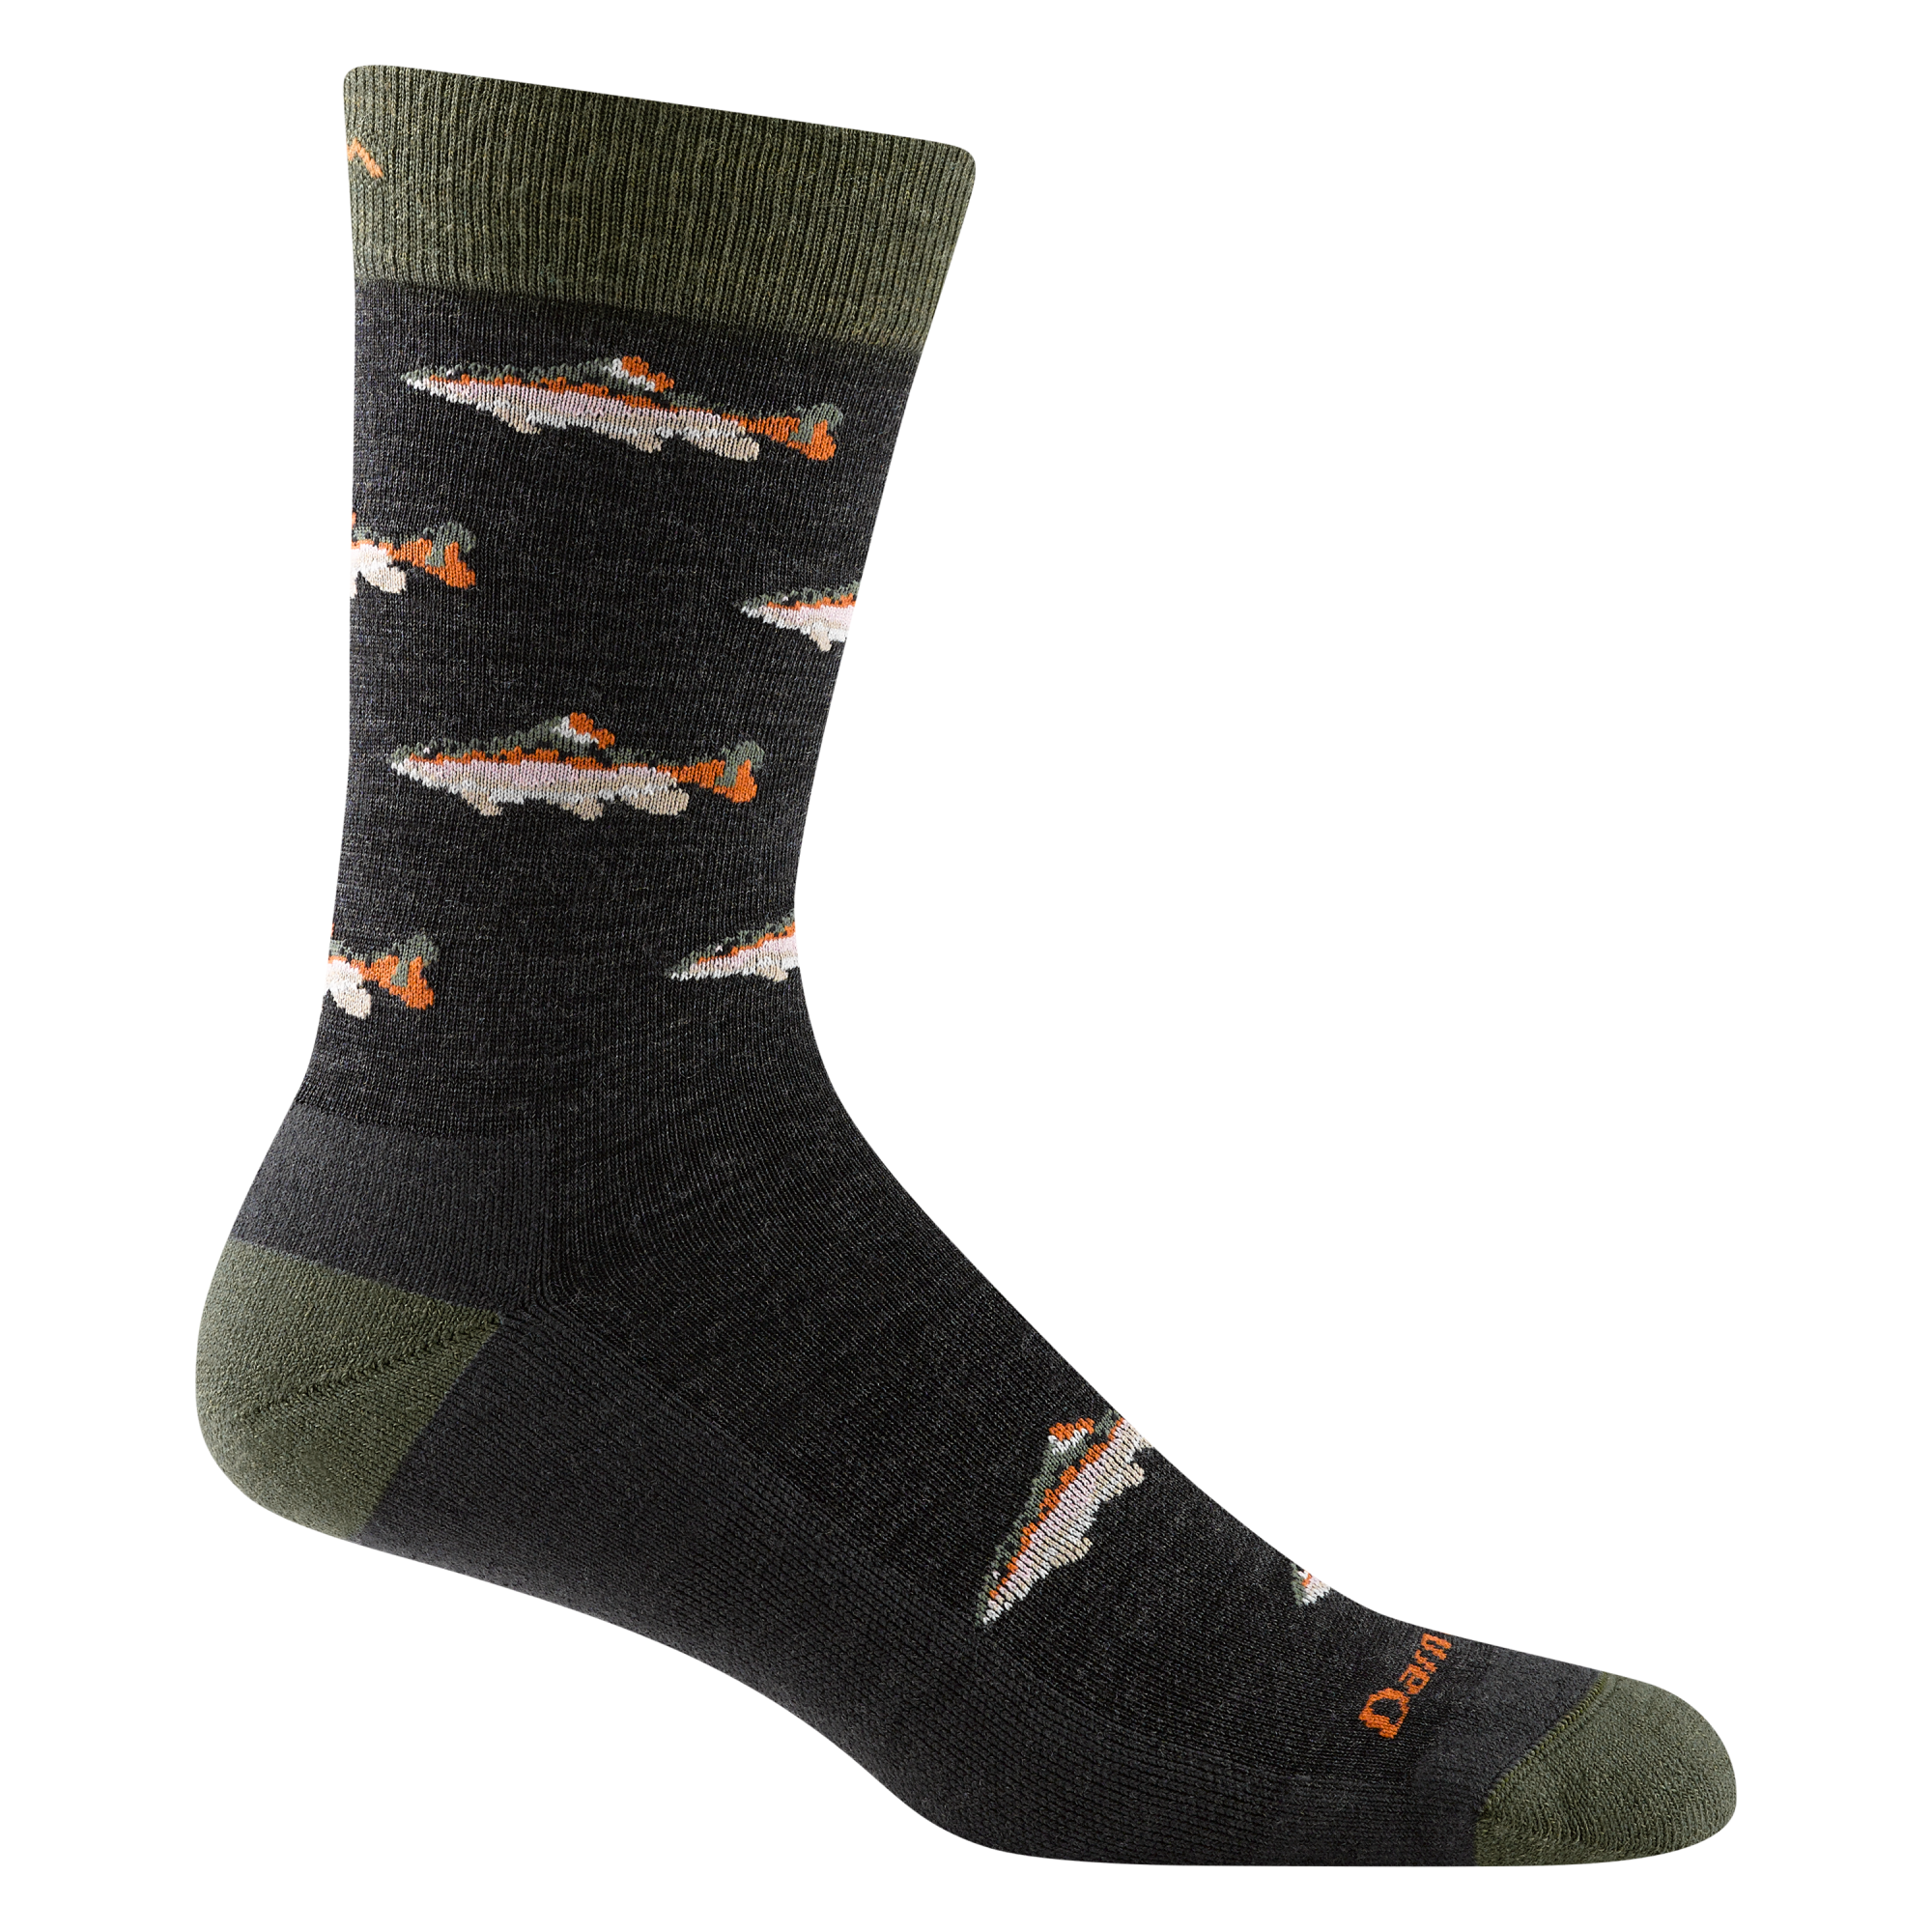 6085 men's spey fly crew lifestyle sock in charcoal with olive green toe/heel accents and tan and orange fishes design